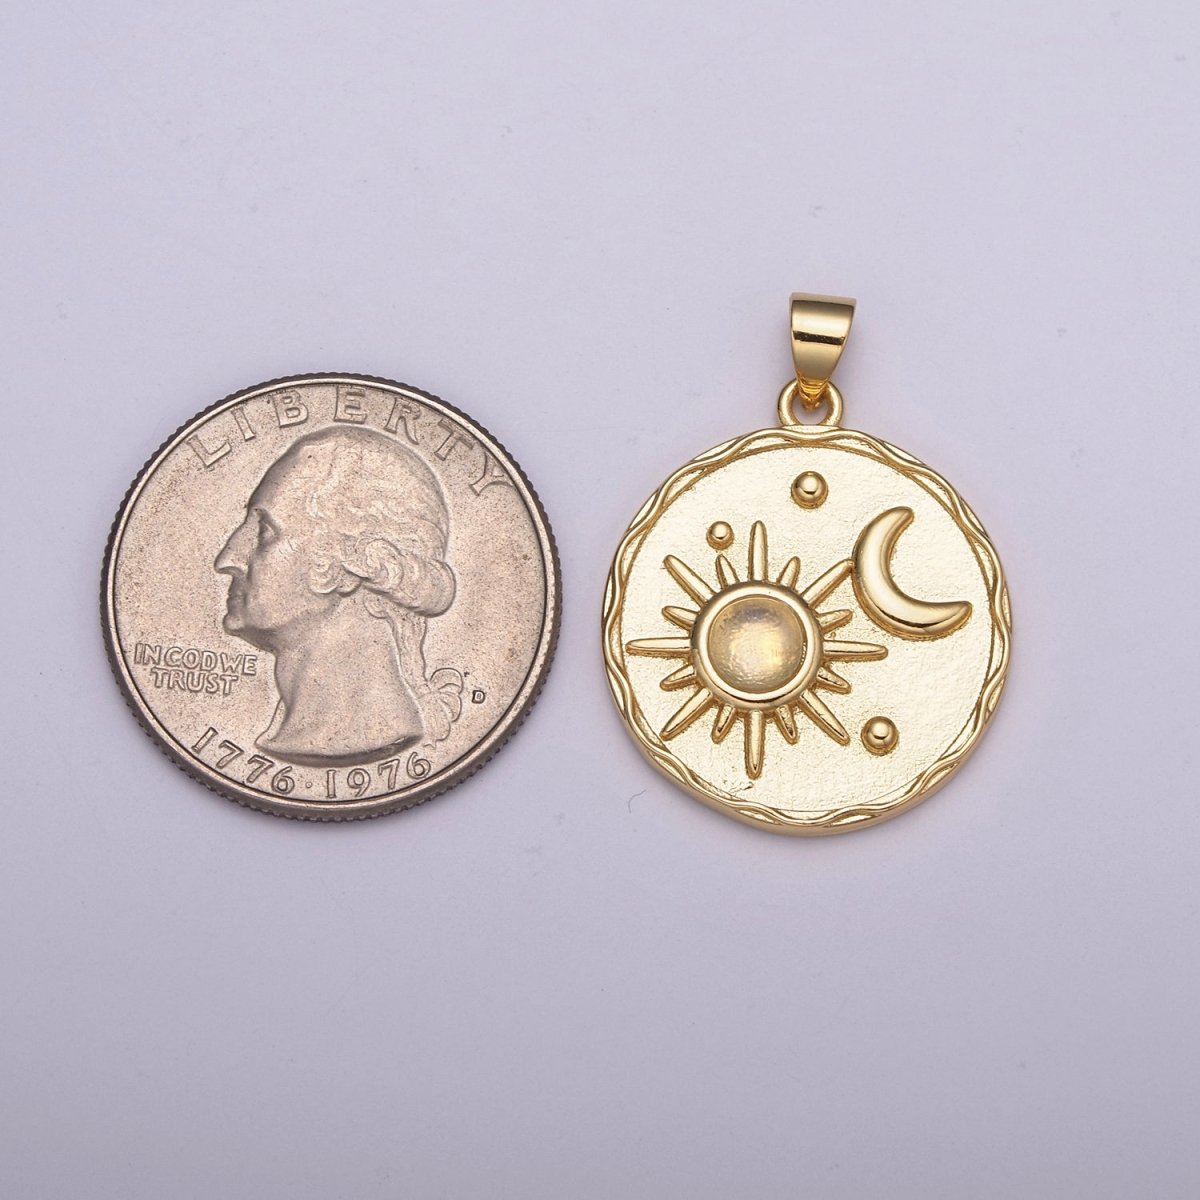 14k Gold filled Celestial charm w/ Moonstone Sun Moon Medallion pendant, Necklace supply, Jewelry makings N-512 N-513 - DLUXCA